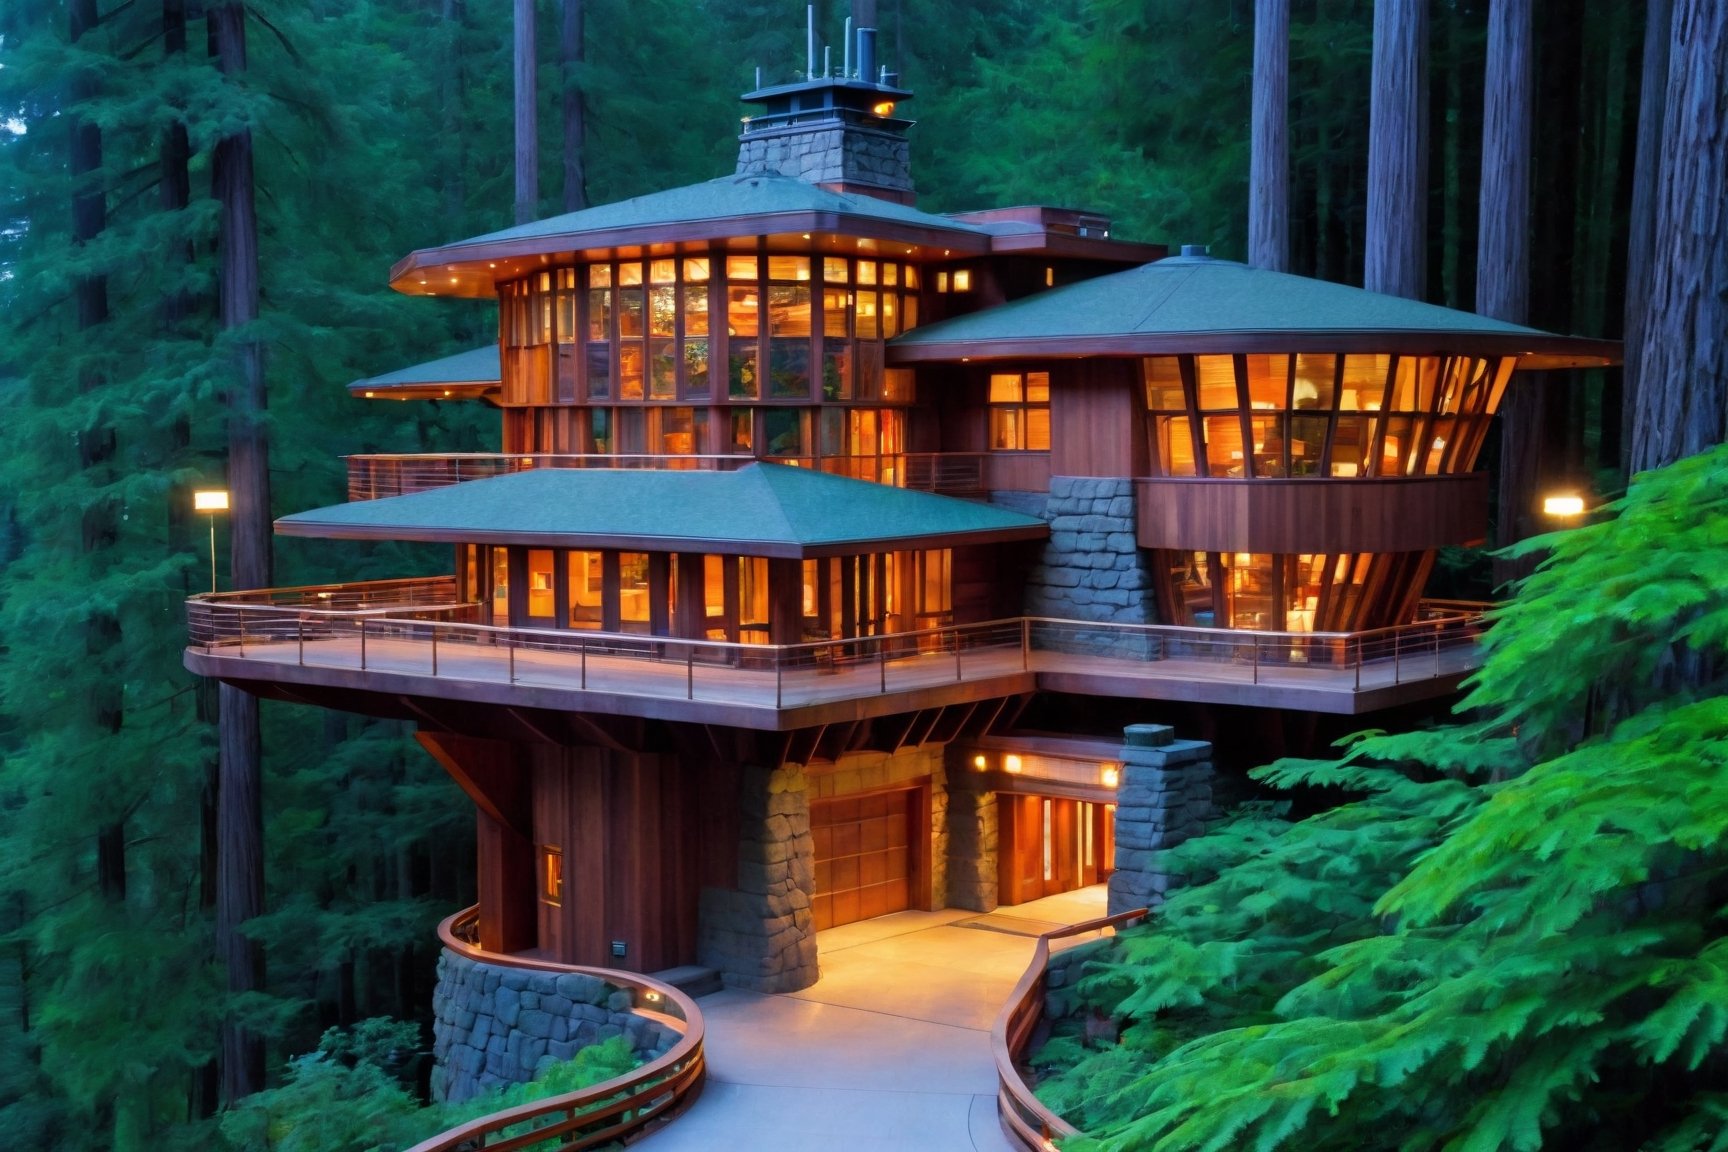 long shot ((masterpiece)), (((best quality))), ((ultra-detailed)), beautiful elaborate realistic ifrank lloyd wright  treehouse deep in a lush green redwood forest, large tall redwood trees, the tree house is spacious, gorgeous frank lloyd wright style architecture, rock slate foundation, there is a large wooden deck around the perimeter of the treehouse, shafts of light shine through the canopy, night time scene, full moon, lit torches outside ,aw0k euphoric style,aw0k euphoricred style, long shot from above looking down, frank lloyd wright 
